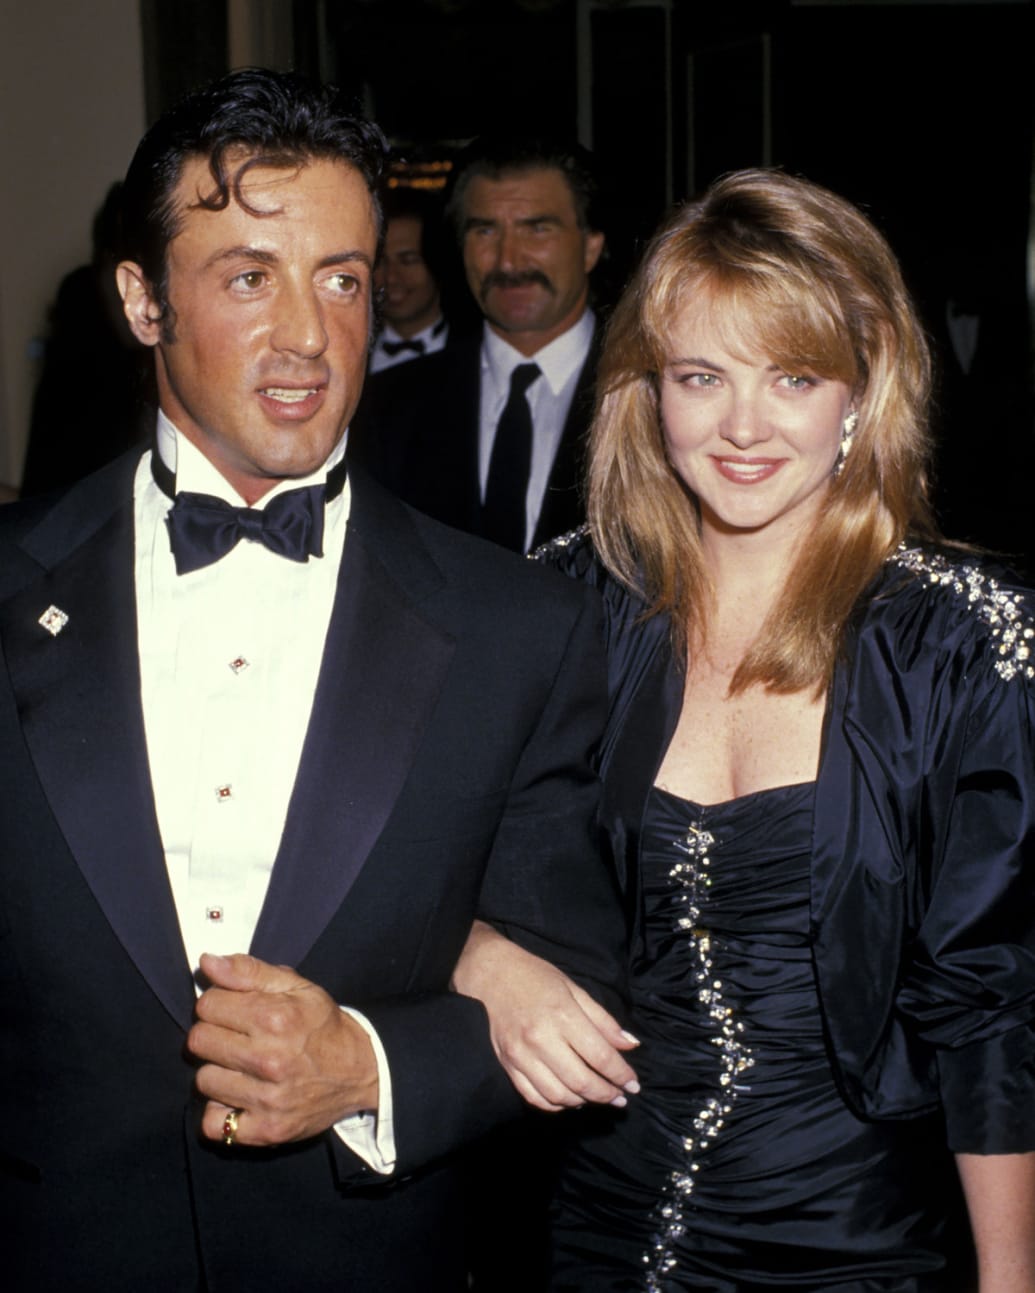 Sylvester Stallone pictured with Cornelia Guest